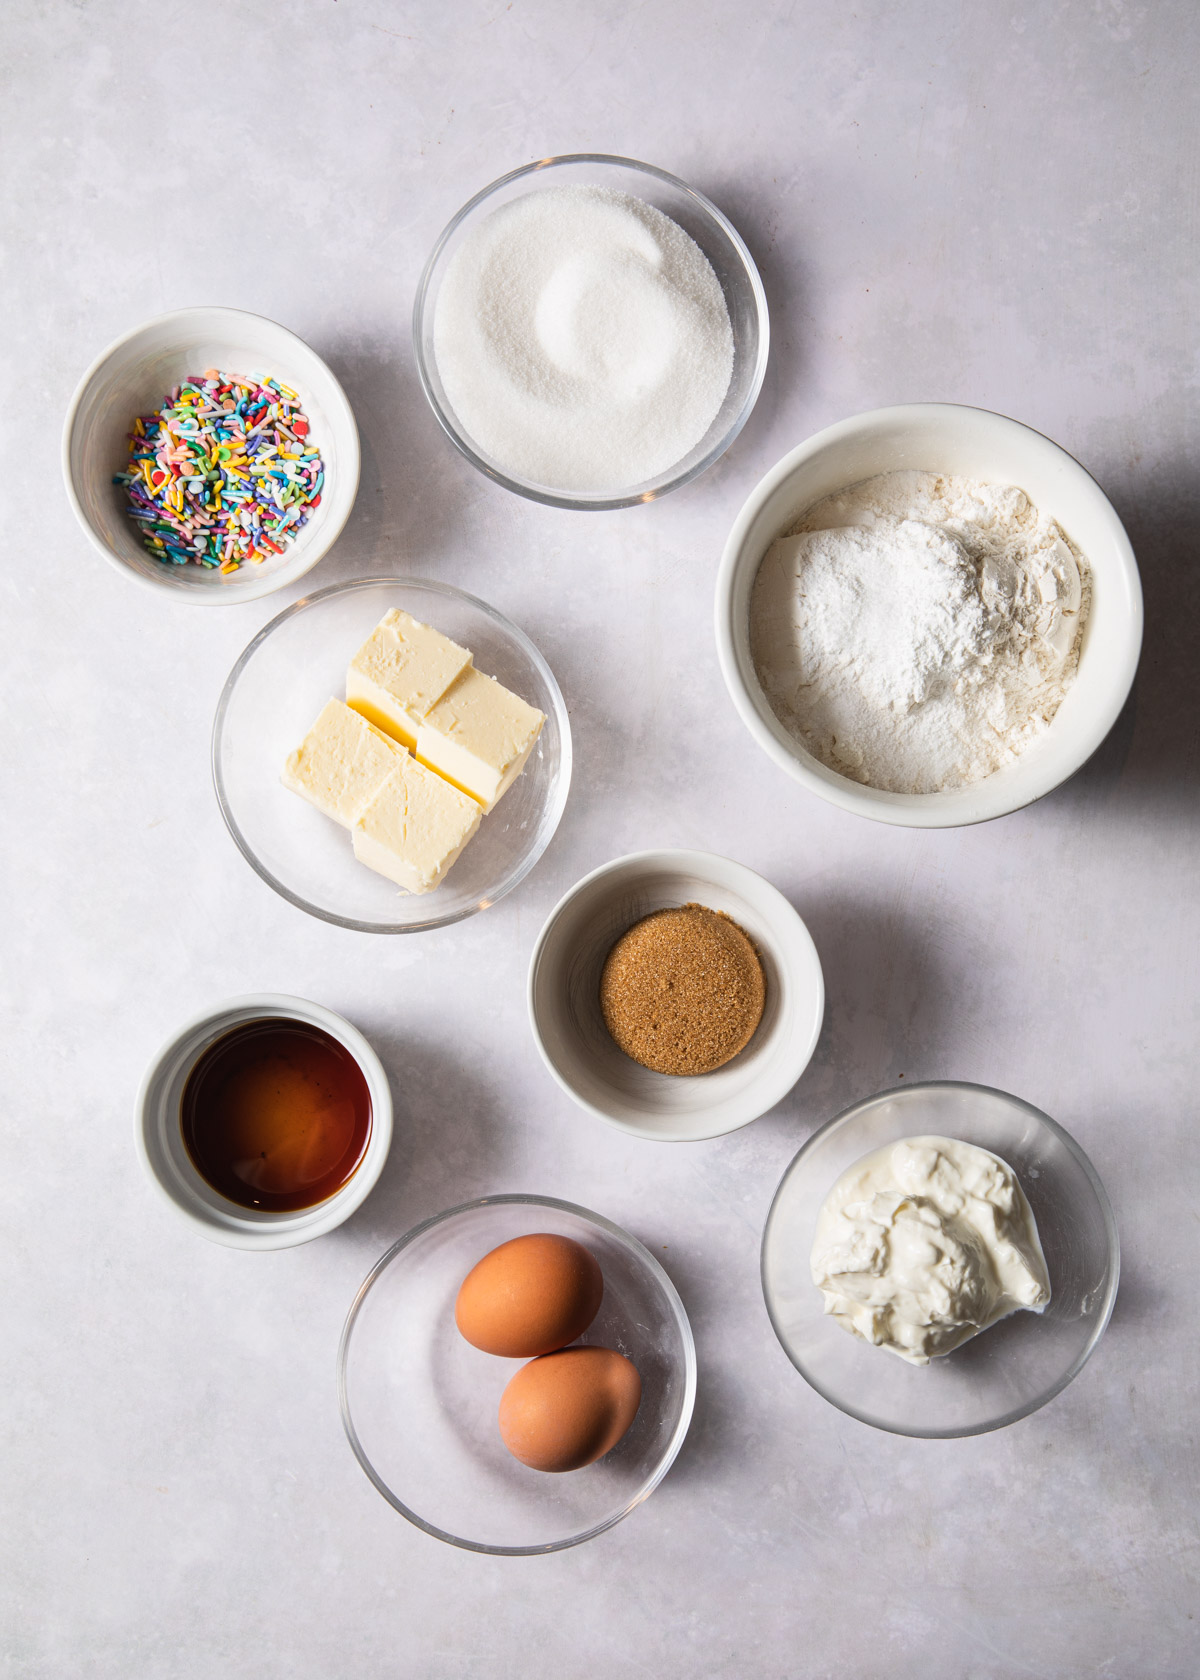 The ingredients needed to bake a birthday coffee cake